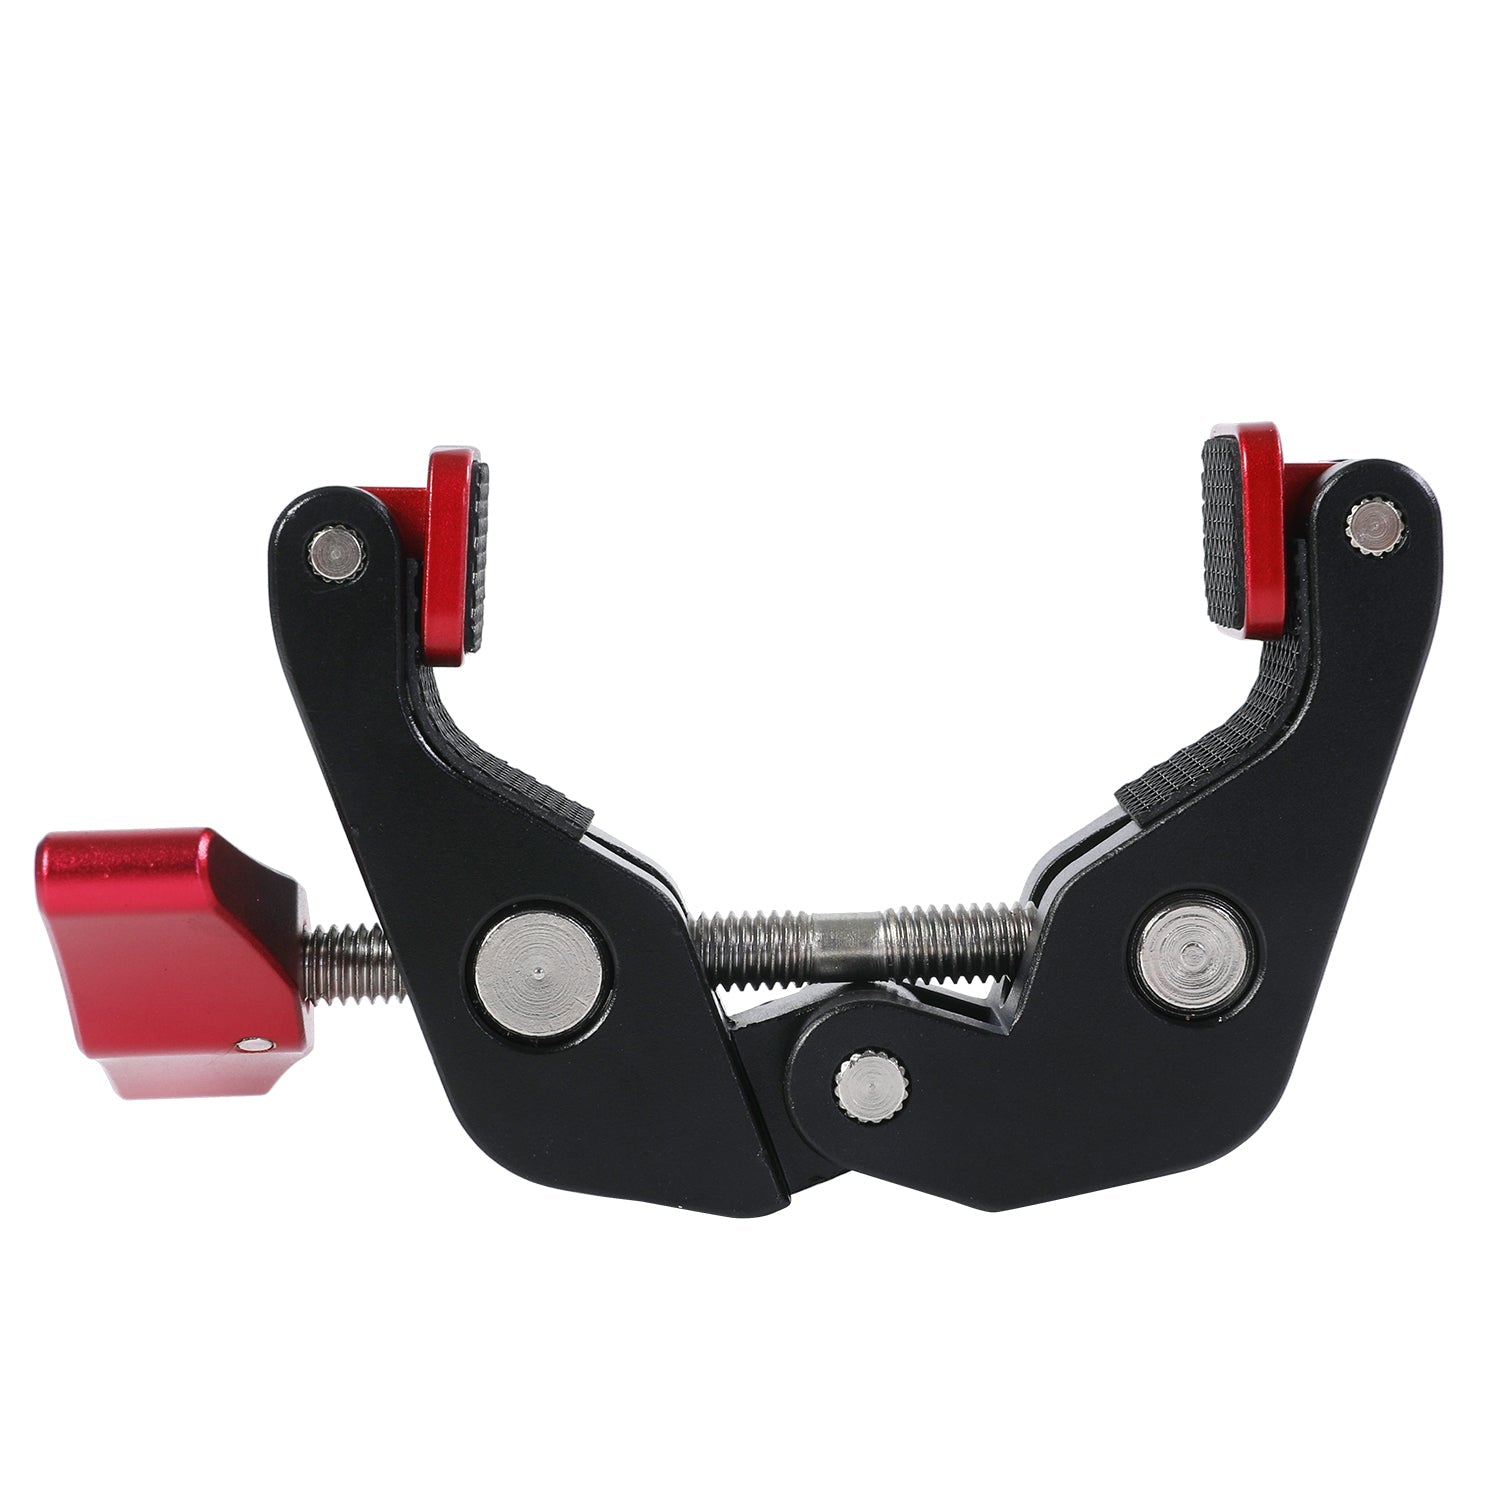 GVM Super Crab Clamp, Magic Arm Gripper Clamp with 1/4 and 3/8 Thread Clips for DSLR Cameras - GVMLED